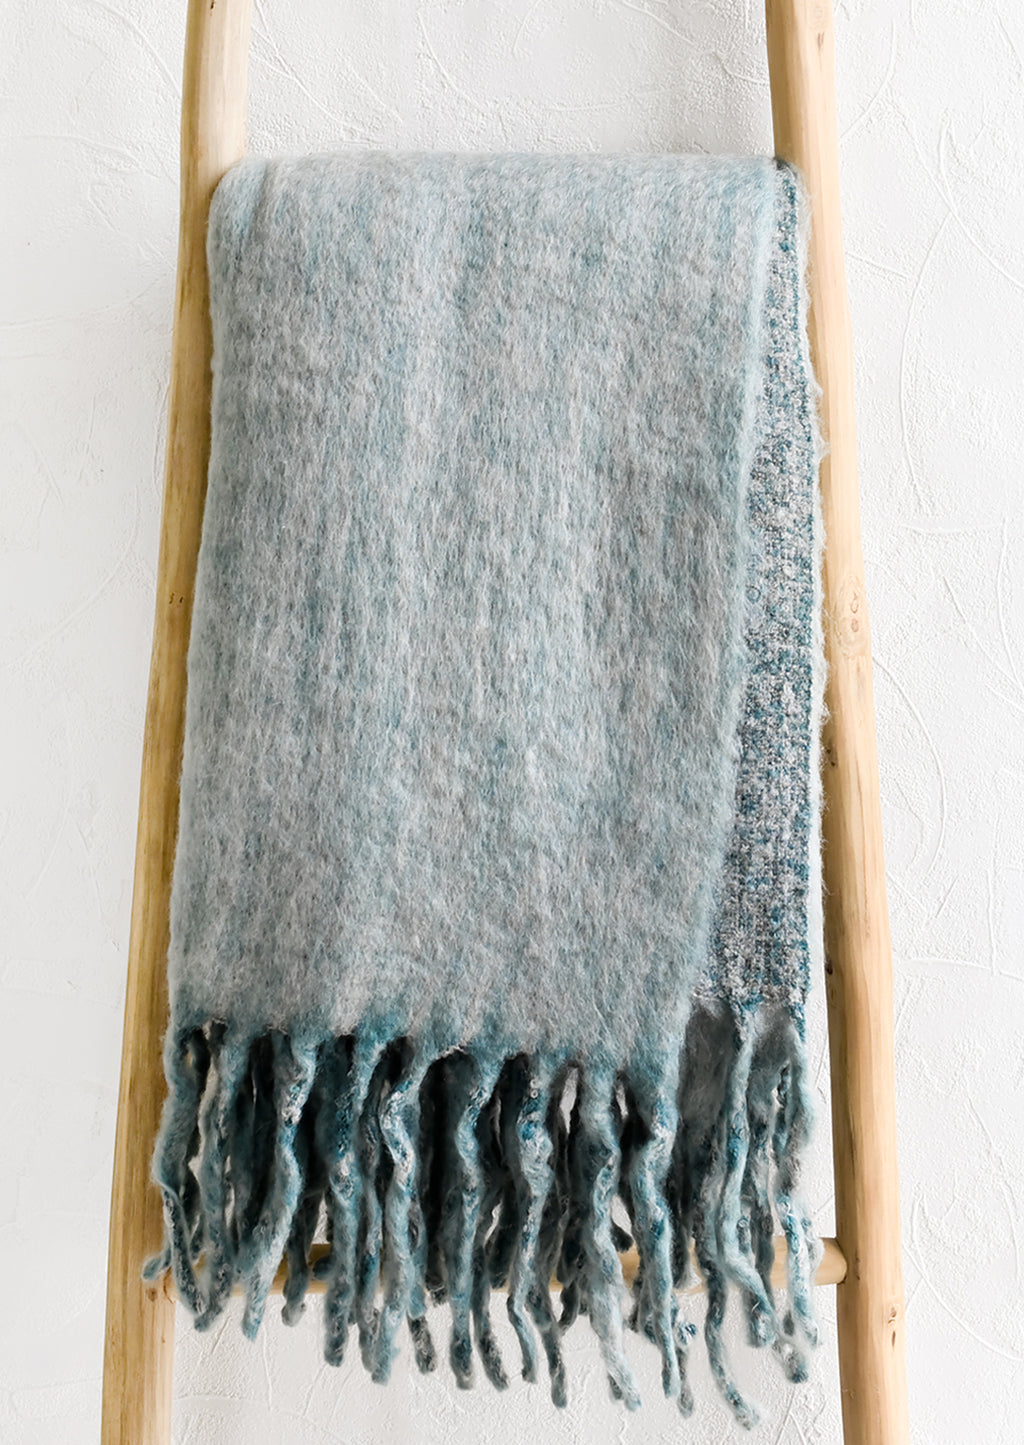 1: A blue-grey mohair throw blanket displayed on a ladder.